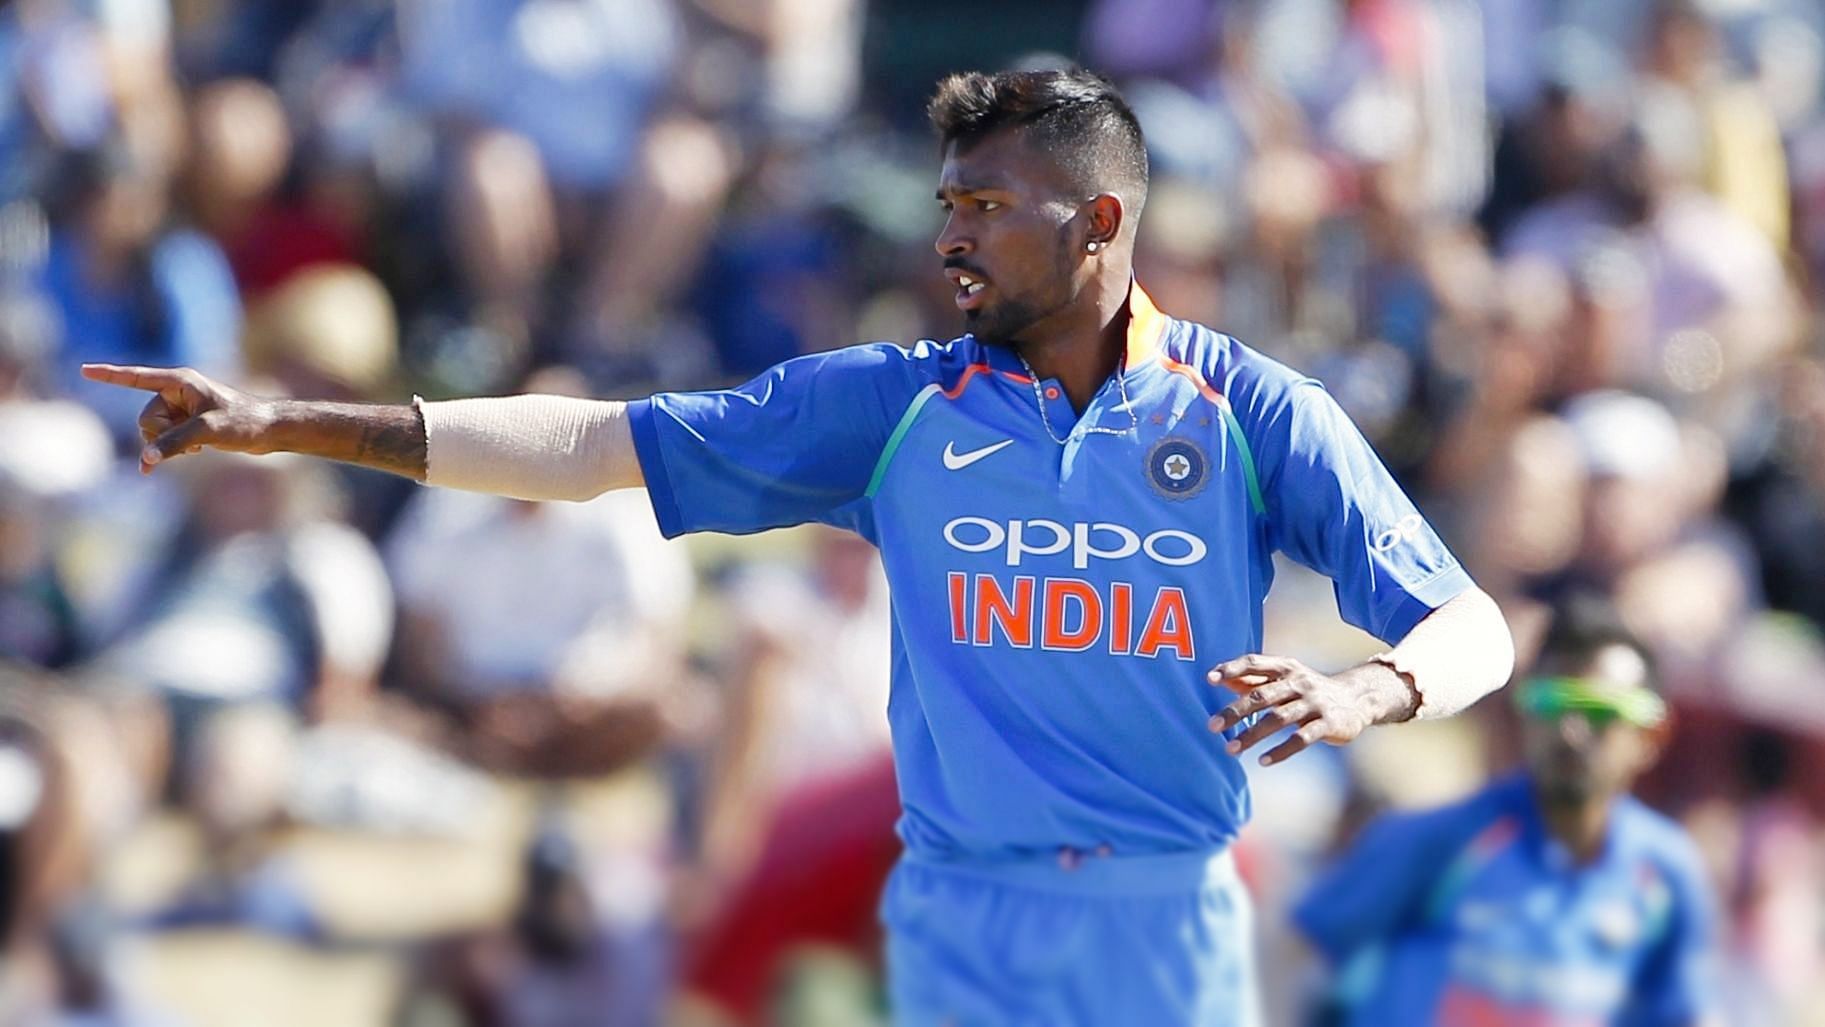 Hardik Pandya has the ability, and may have done enough, to command a place in the XI as a specialist batsman.